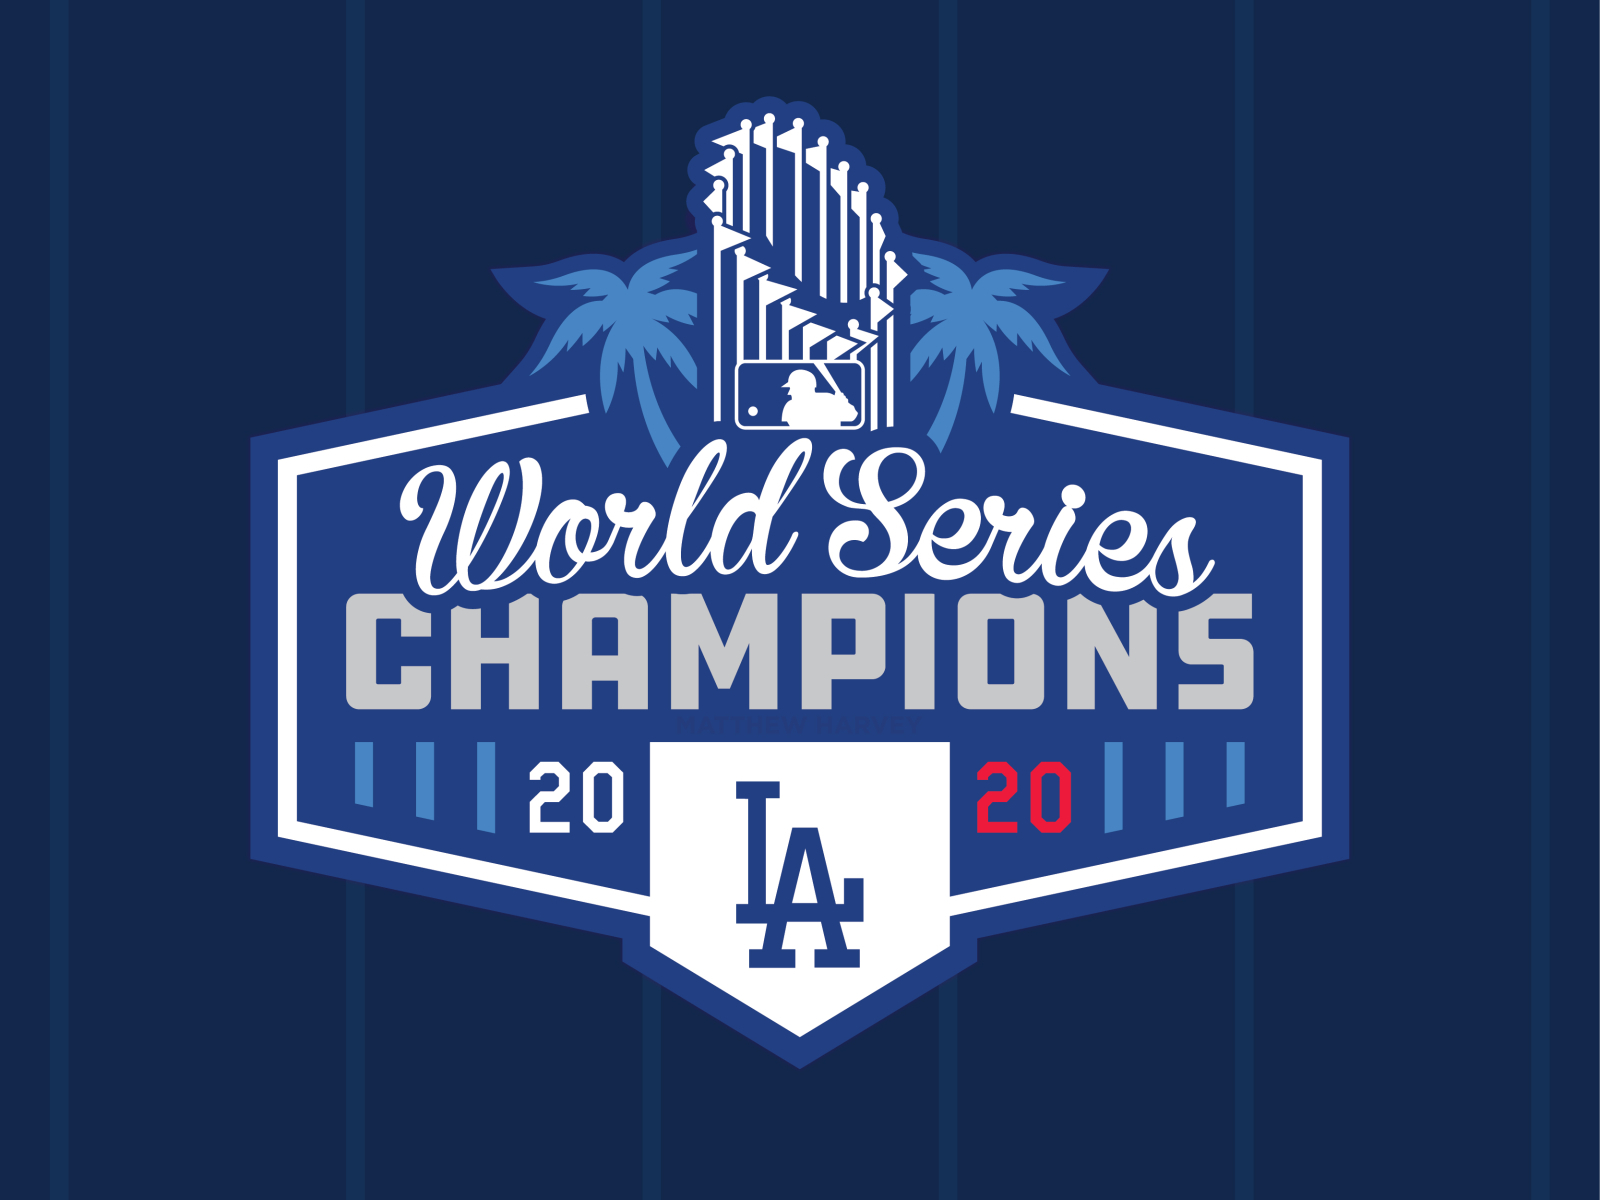 LOS ANGELES DODGERS 2020 WORLD SERIES CHAMPIONS Logo Concept by